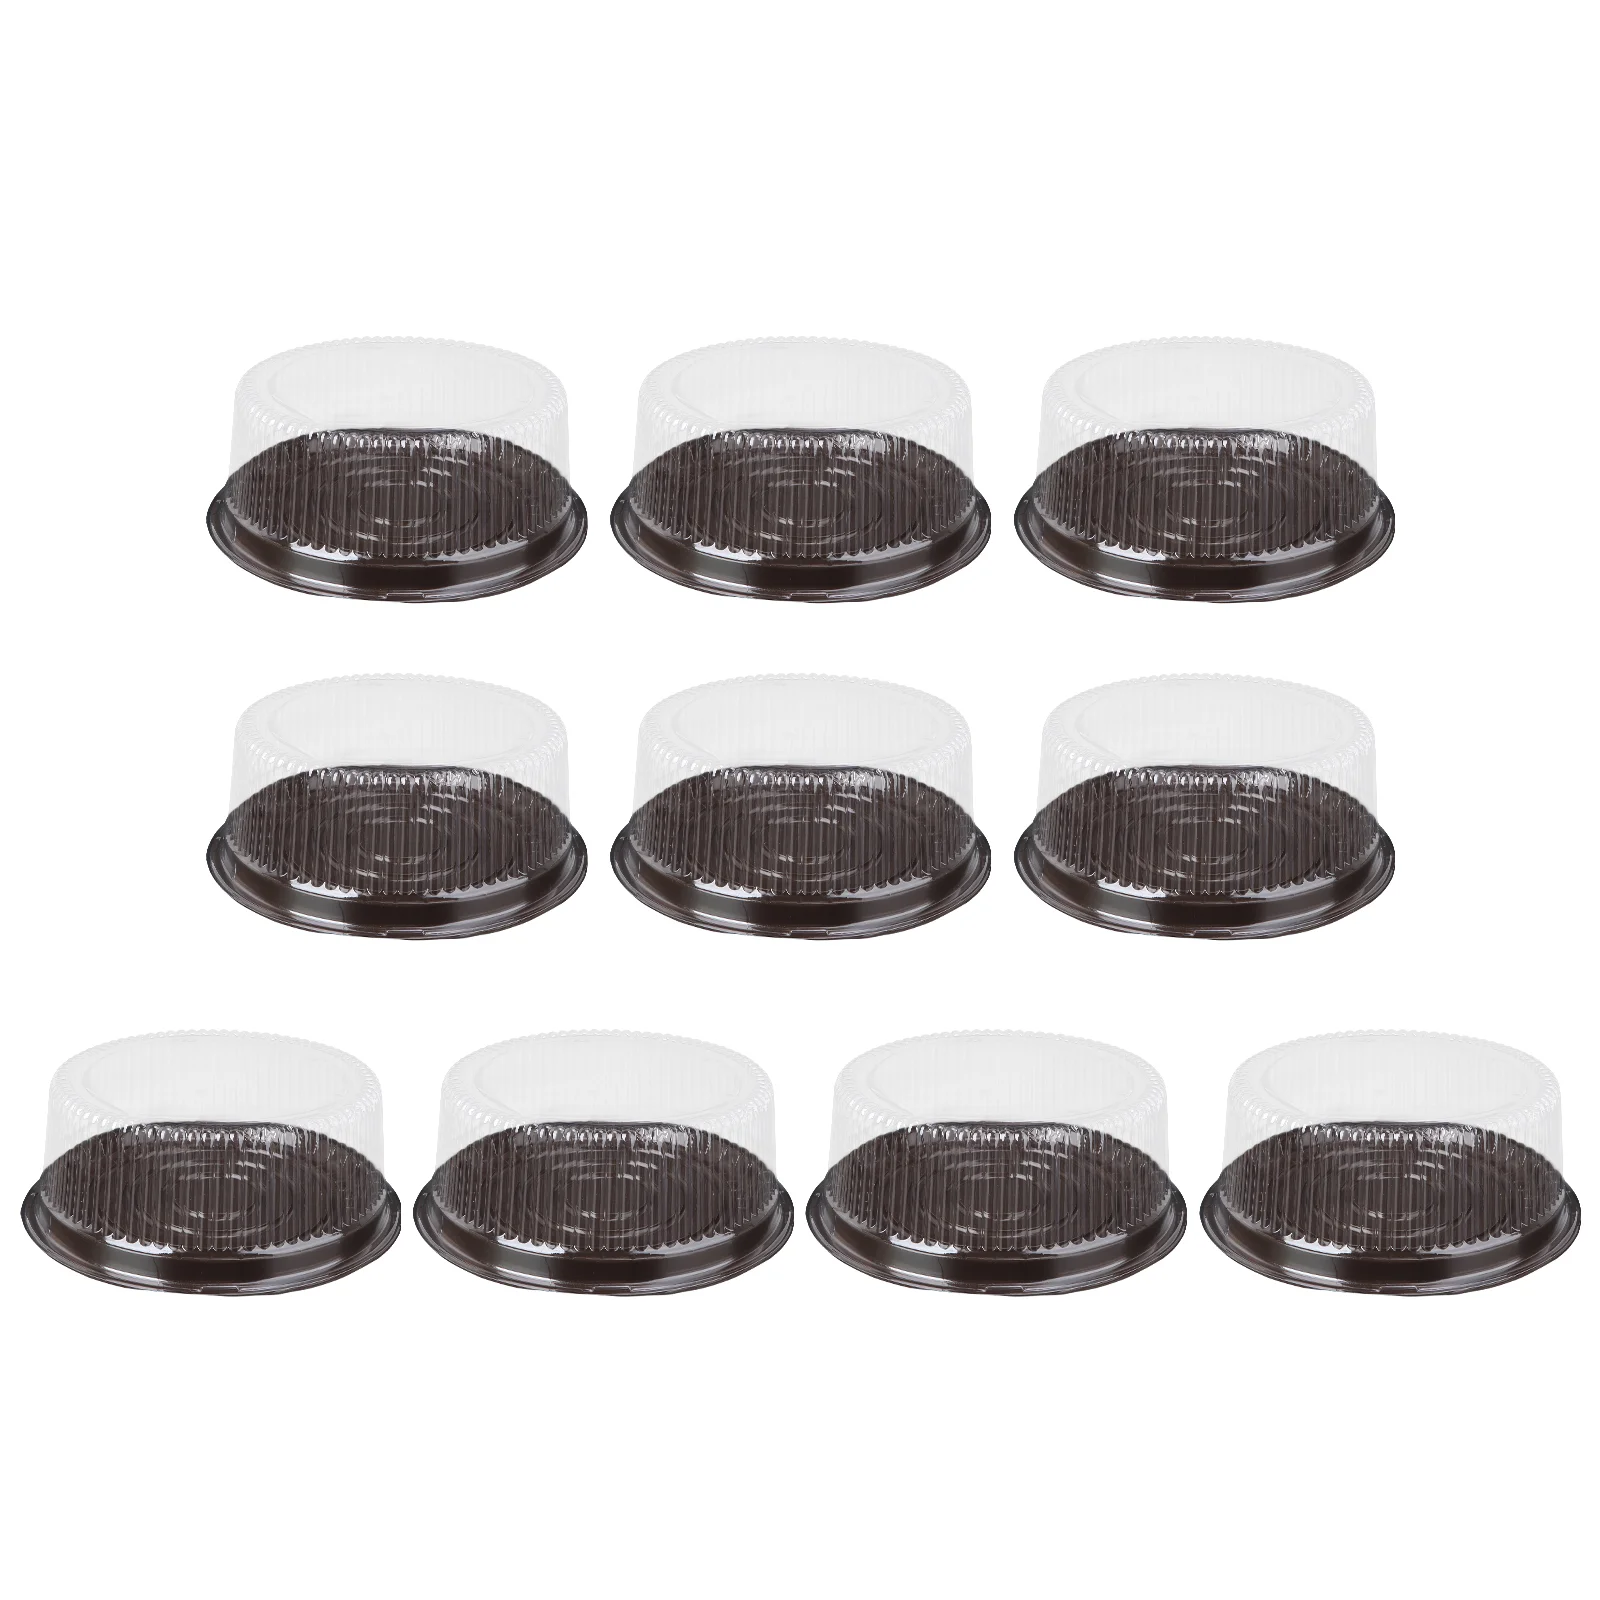 

10Pcs 8 Inch Transparent Cake Box Muffin Cupcake Dessert Transport Case with Dome Lids Pastries Carrying Boxes for Home Shop